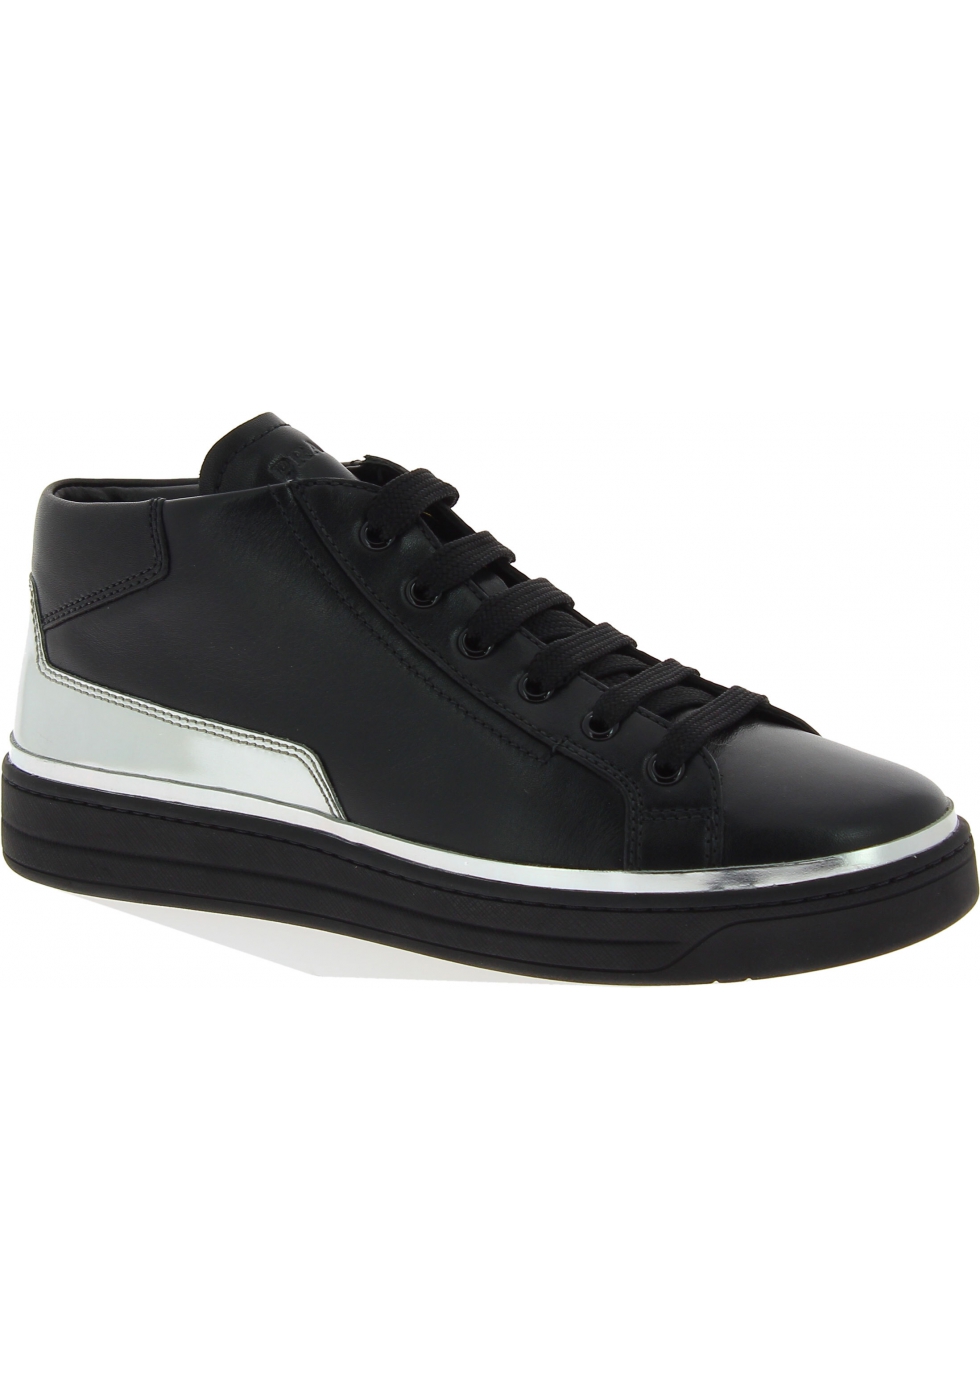 Prada Women&#39;s high top lace-ups sneakers shoes in black silver calf leather - Italian Boutique